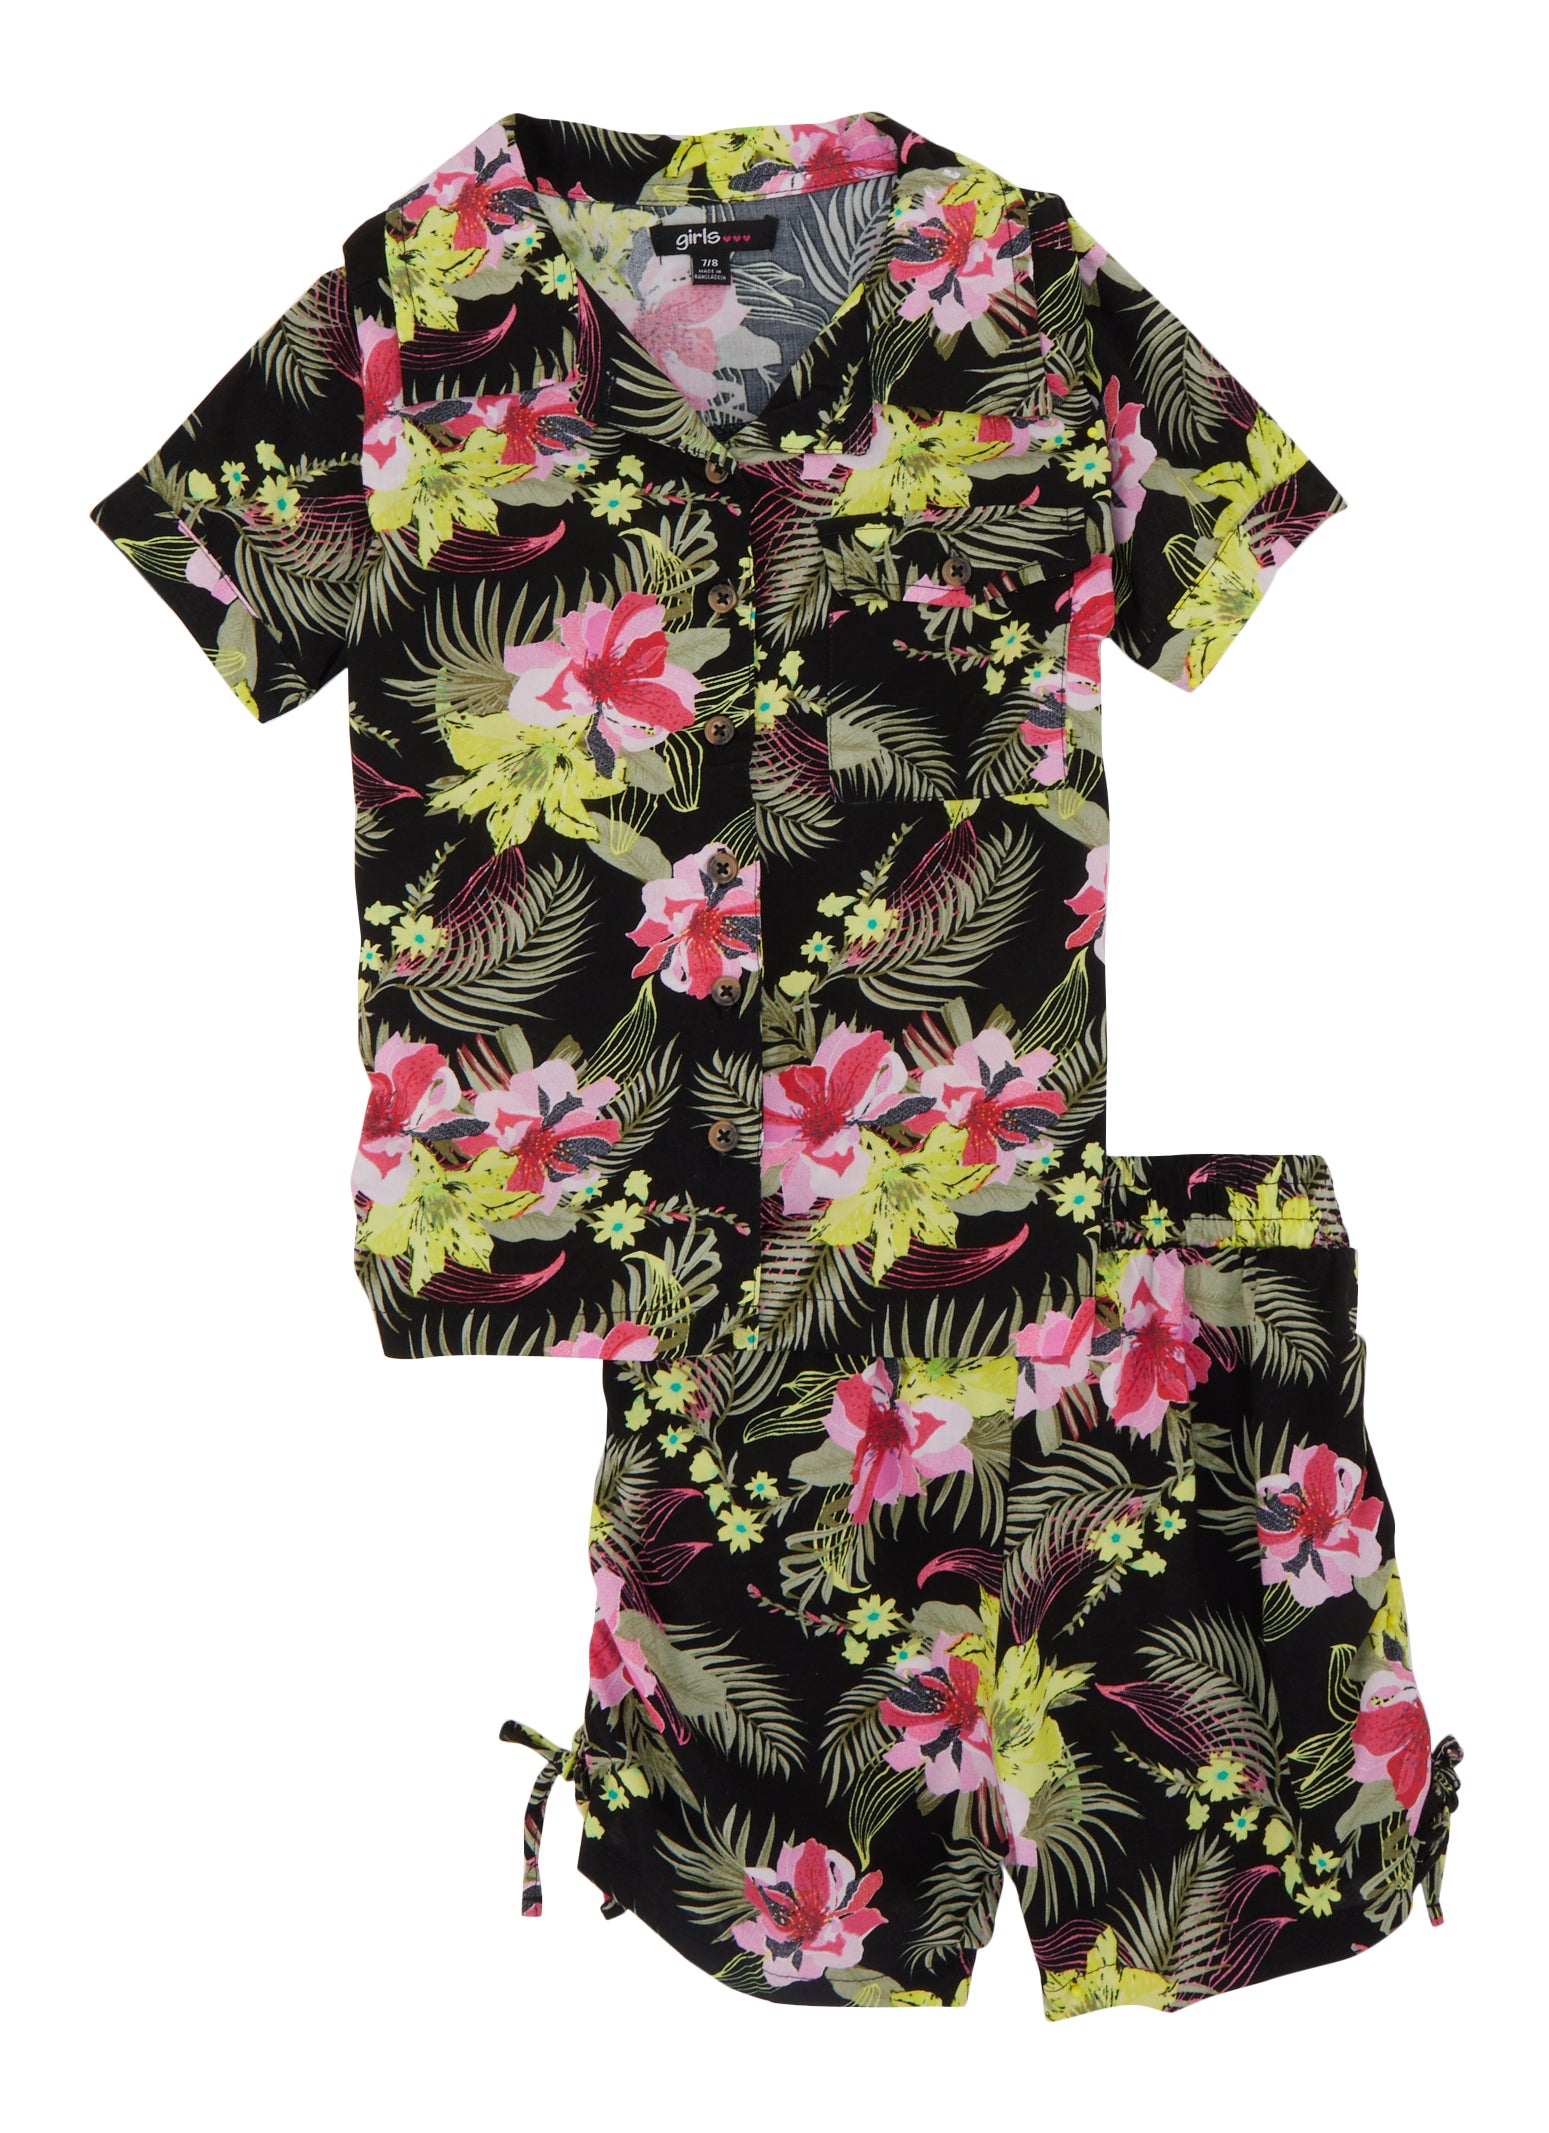 Girls Tropical Print Button Front Top and Shorts